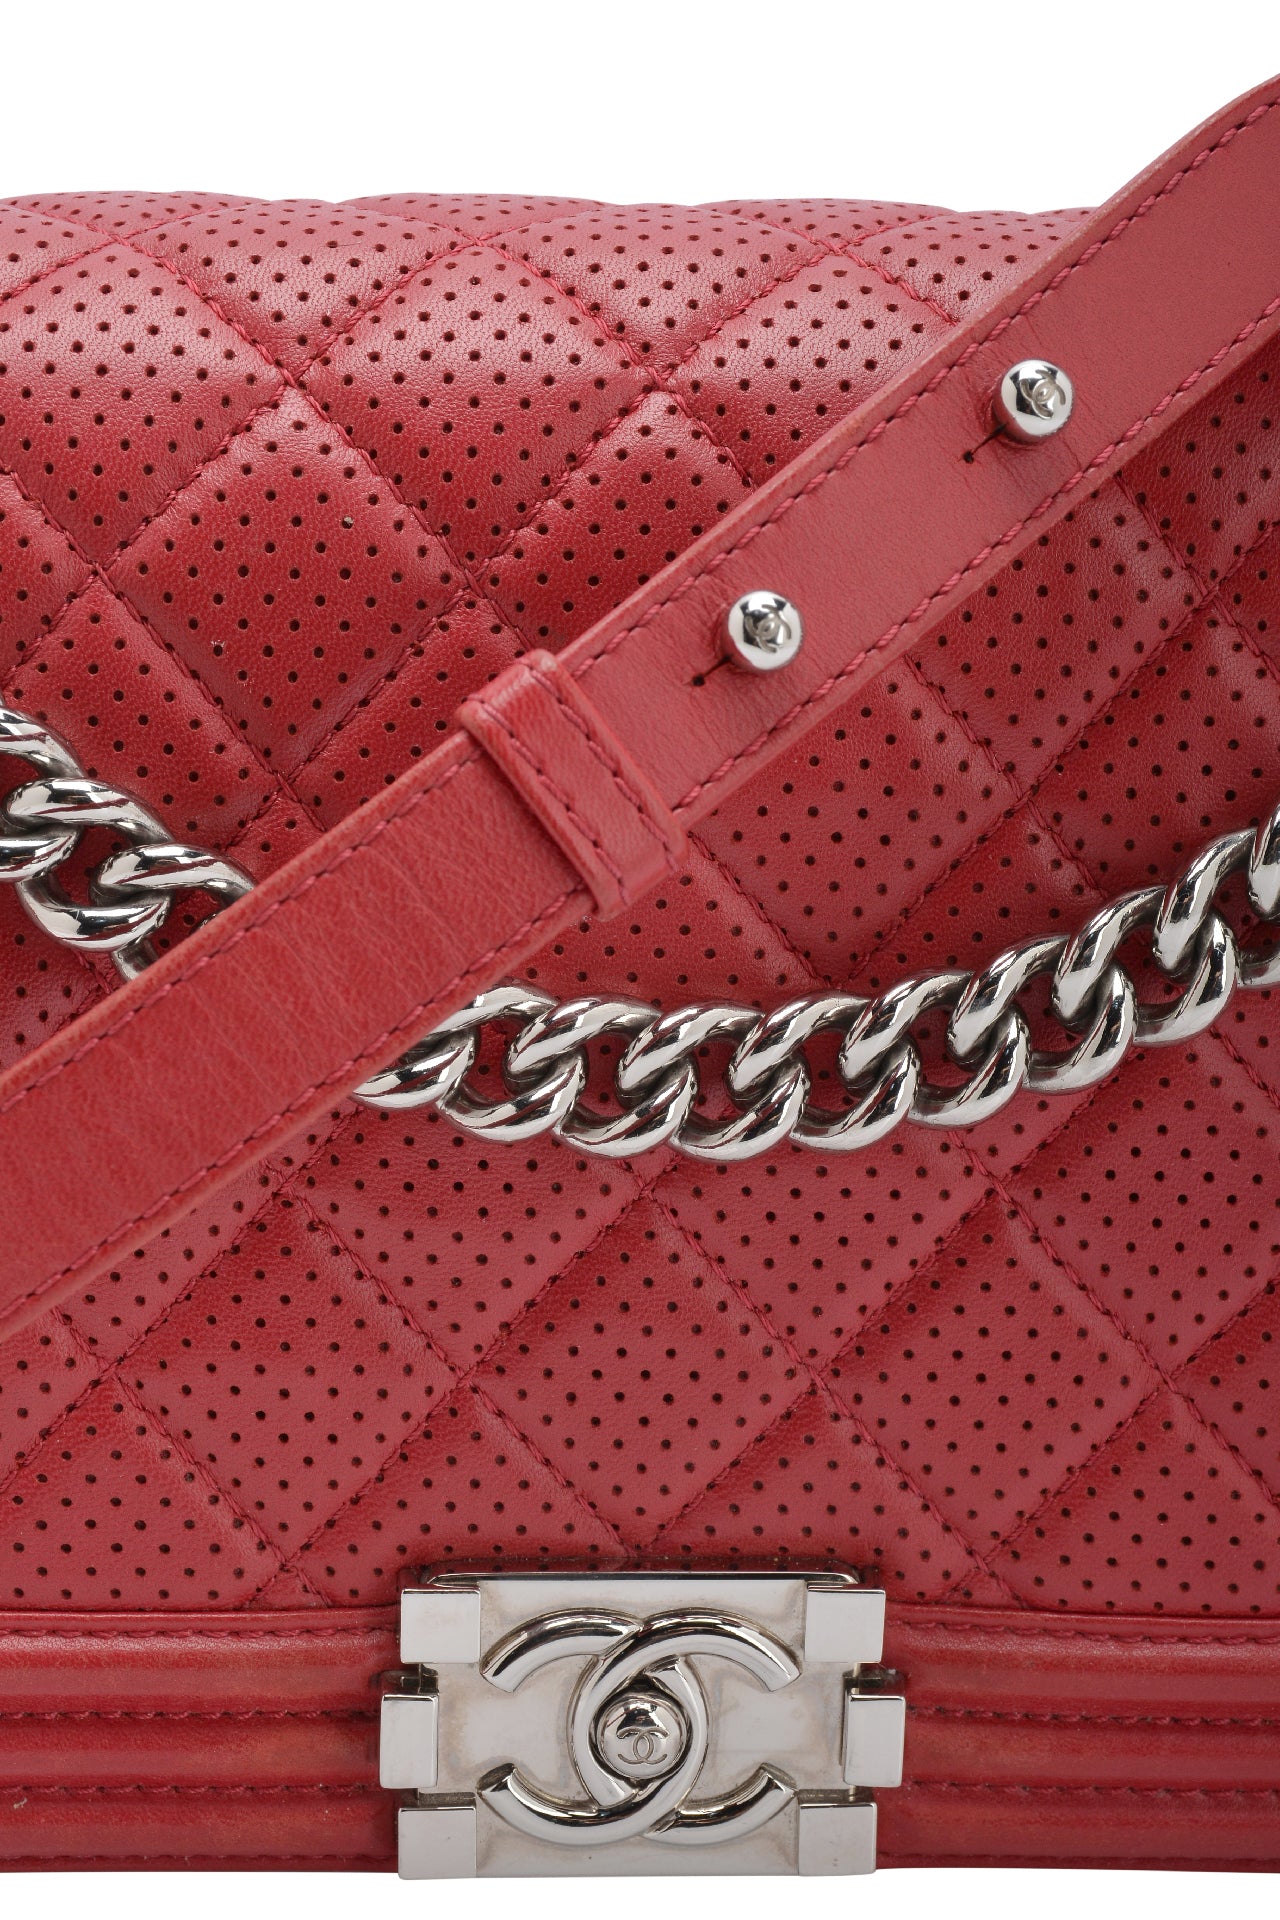 Chanel Perforated Red Large Boy Bag